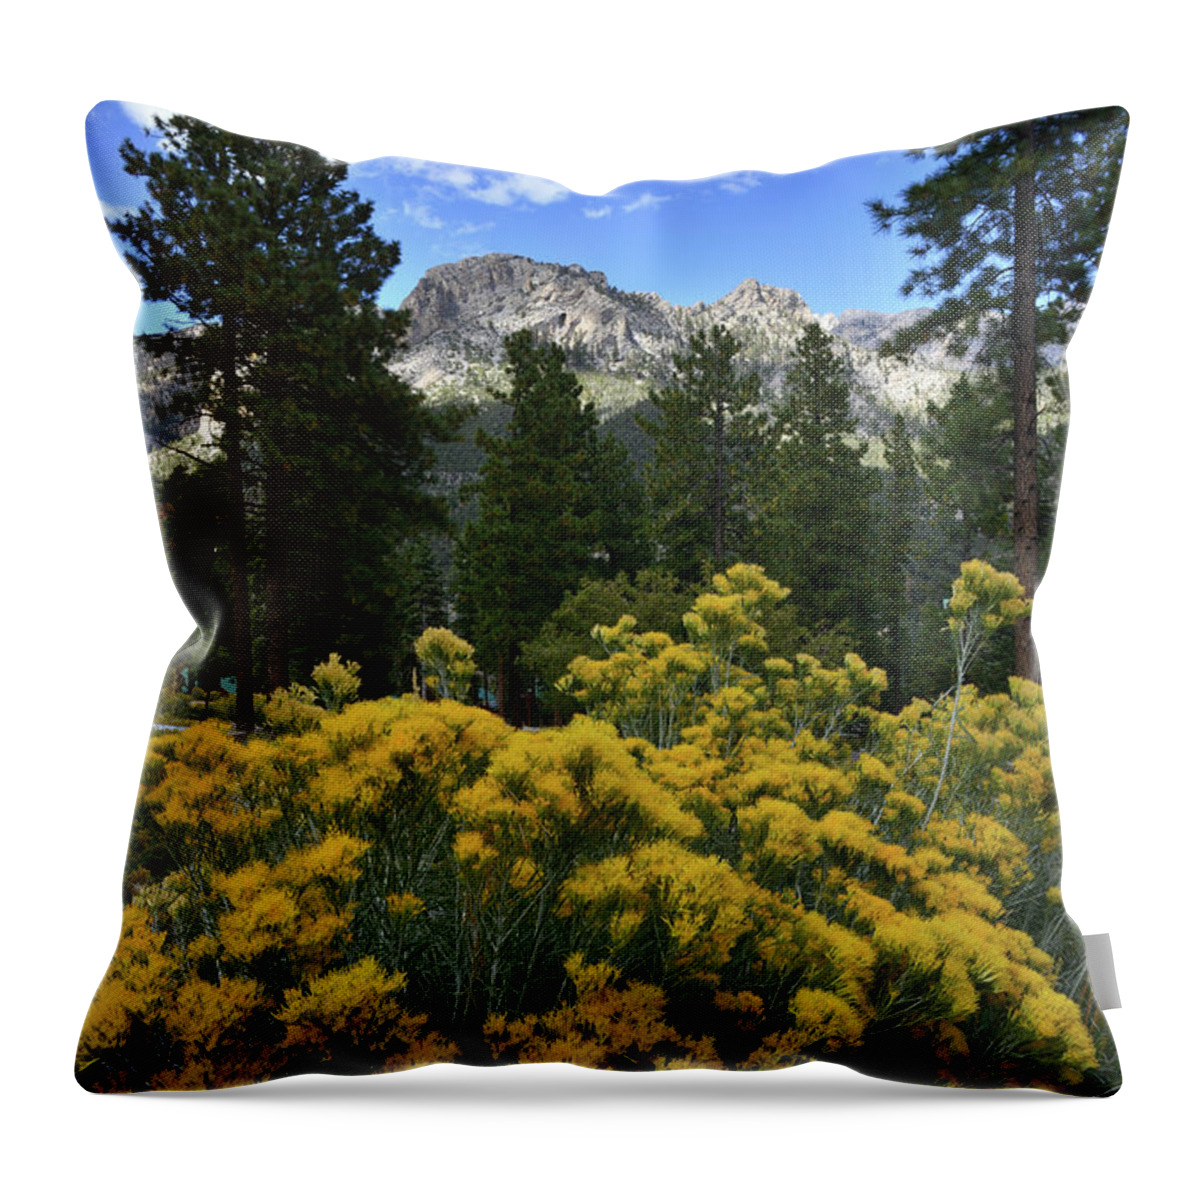 Humboldt-toiyabe National Forest Throw Pillow featuring the photograph Natural Area Beneath Mt. Charleston by Ray Mathis